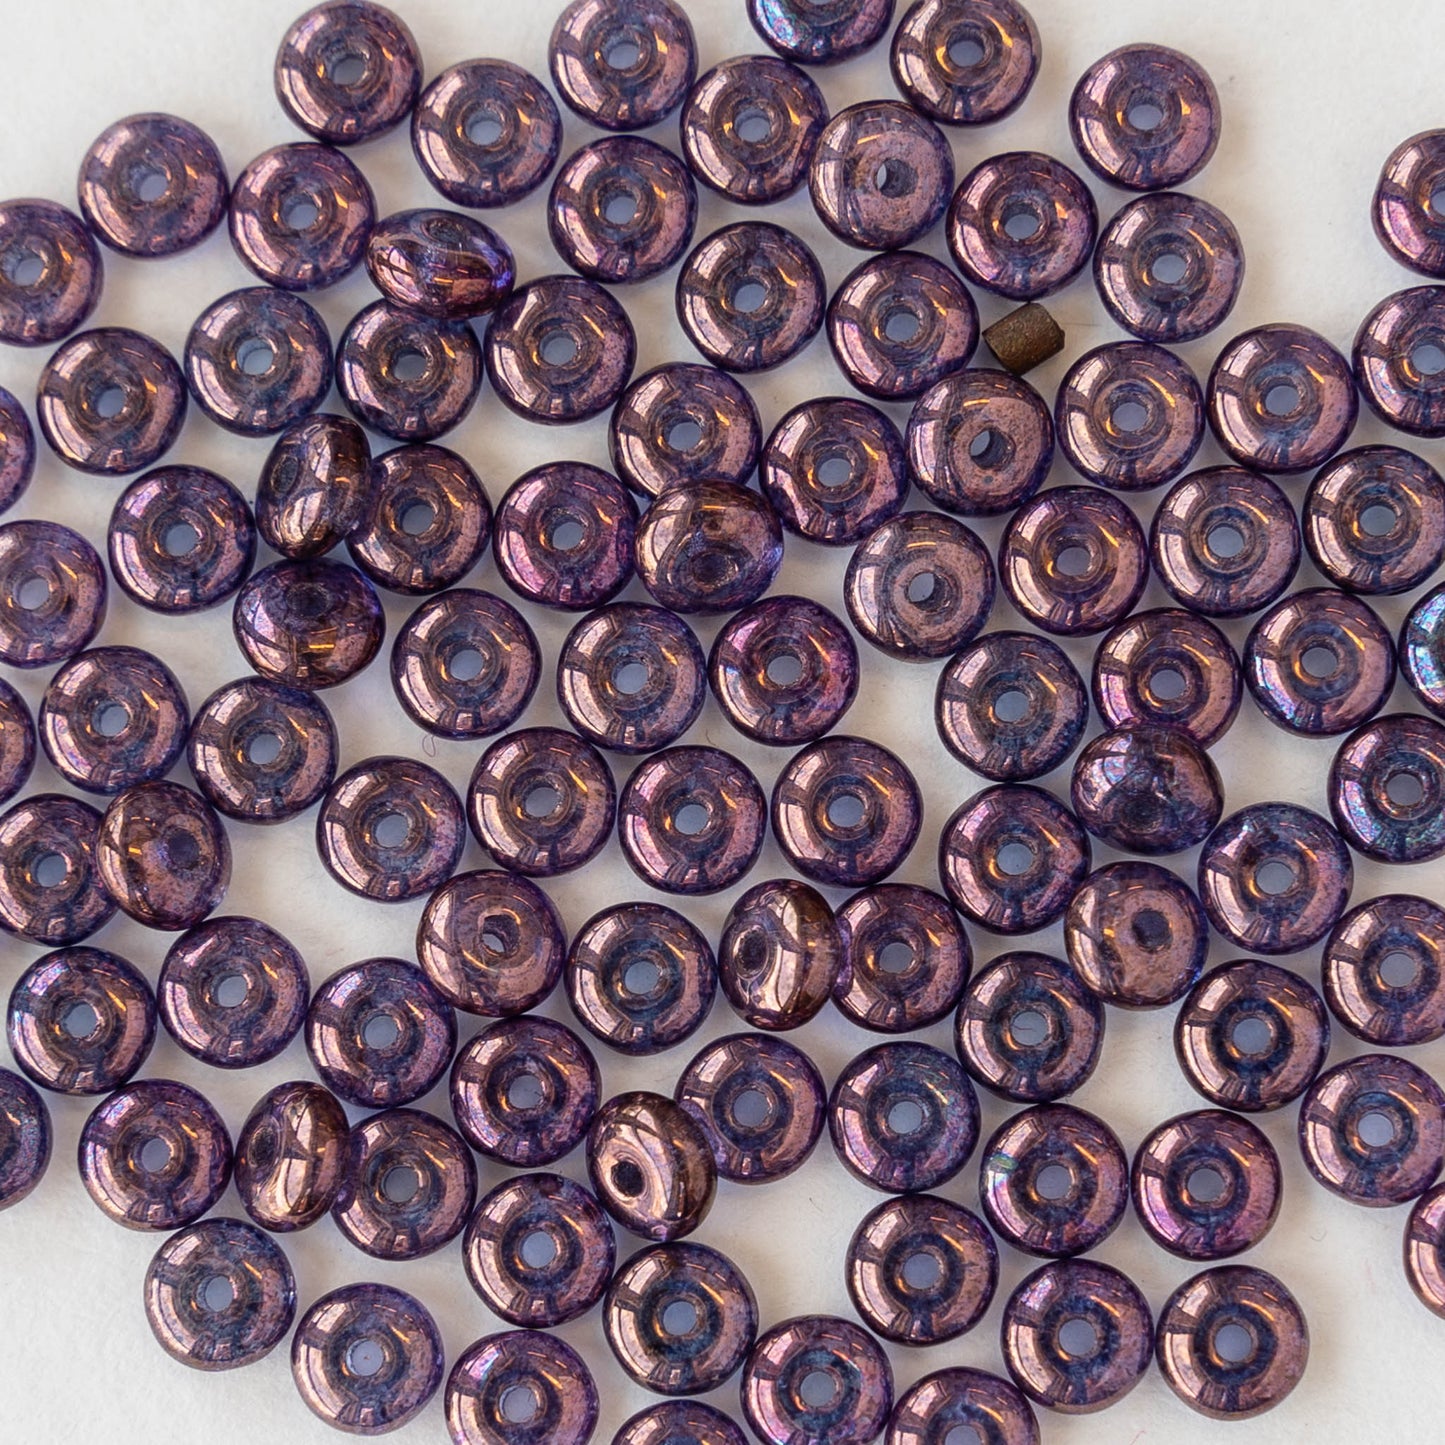 4mm Rondelle Beads - Purple Luster - 100 Beads